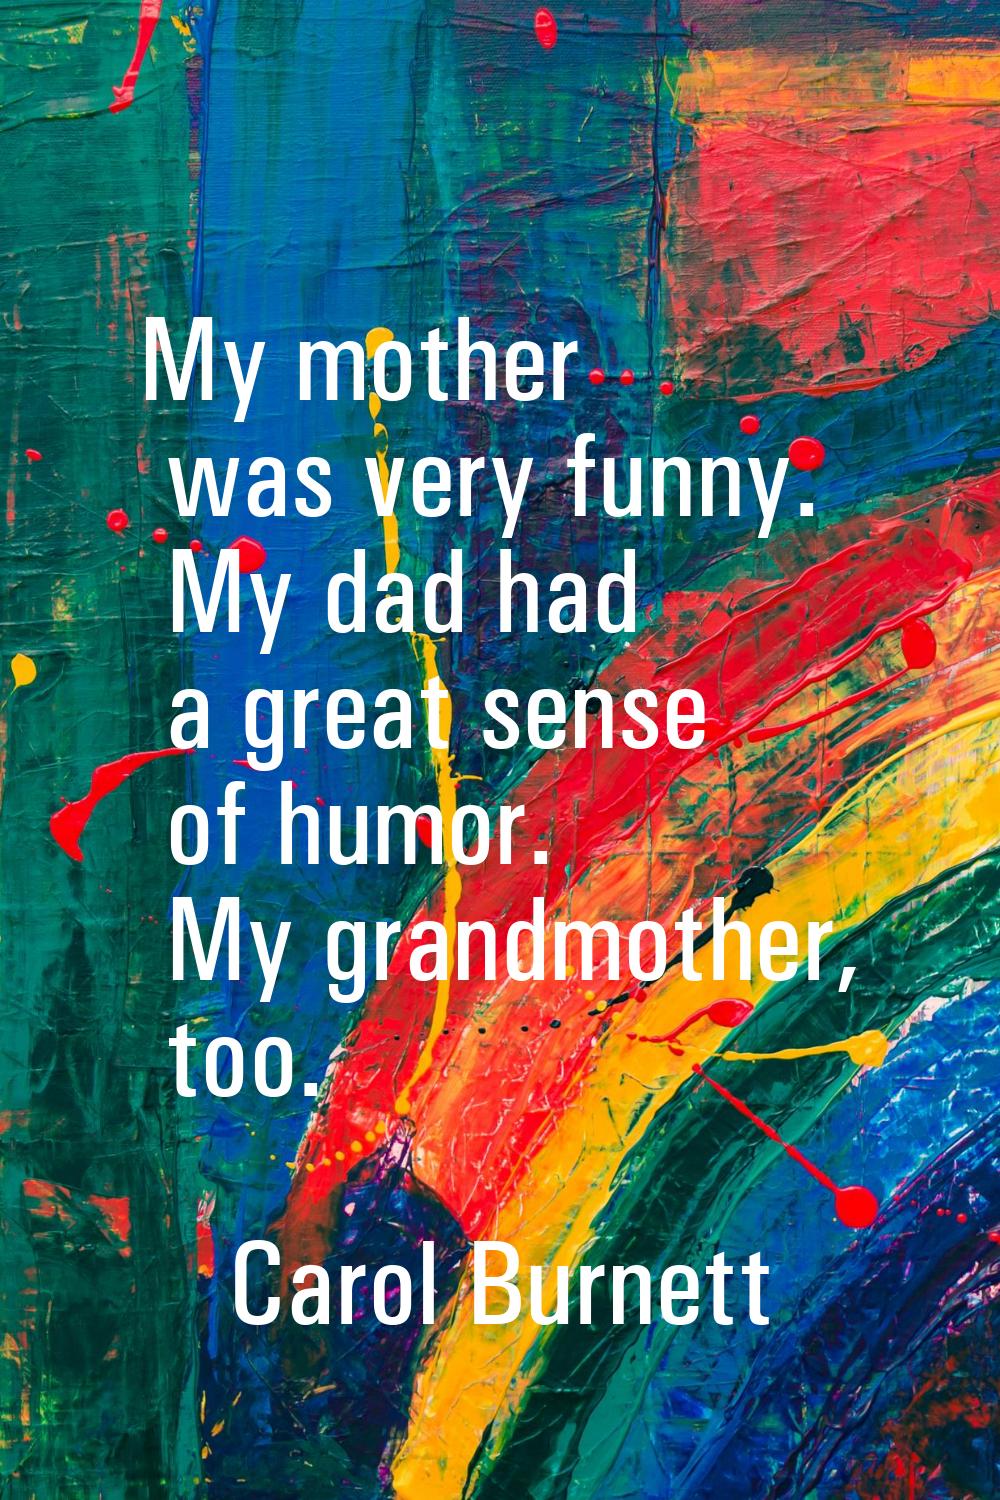 My mother was very funny. My dad had a great sense of humor. My grandmother, too.